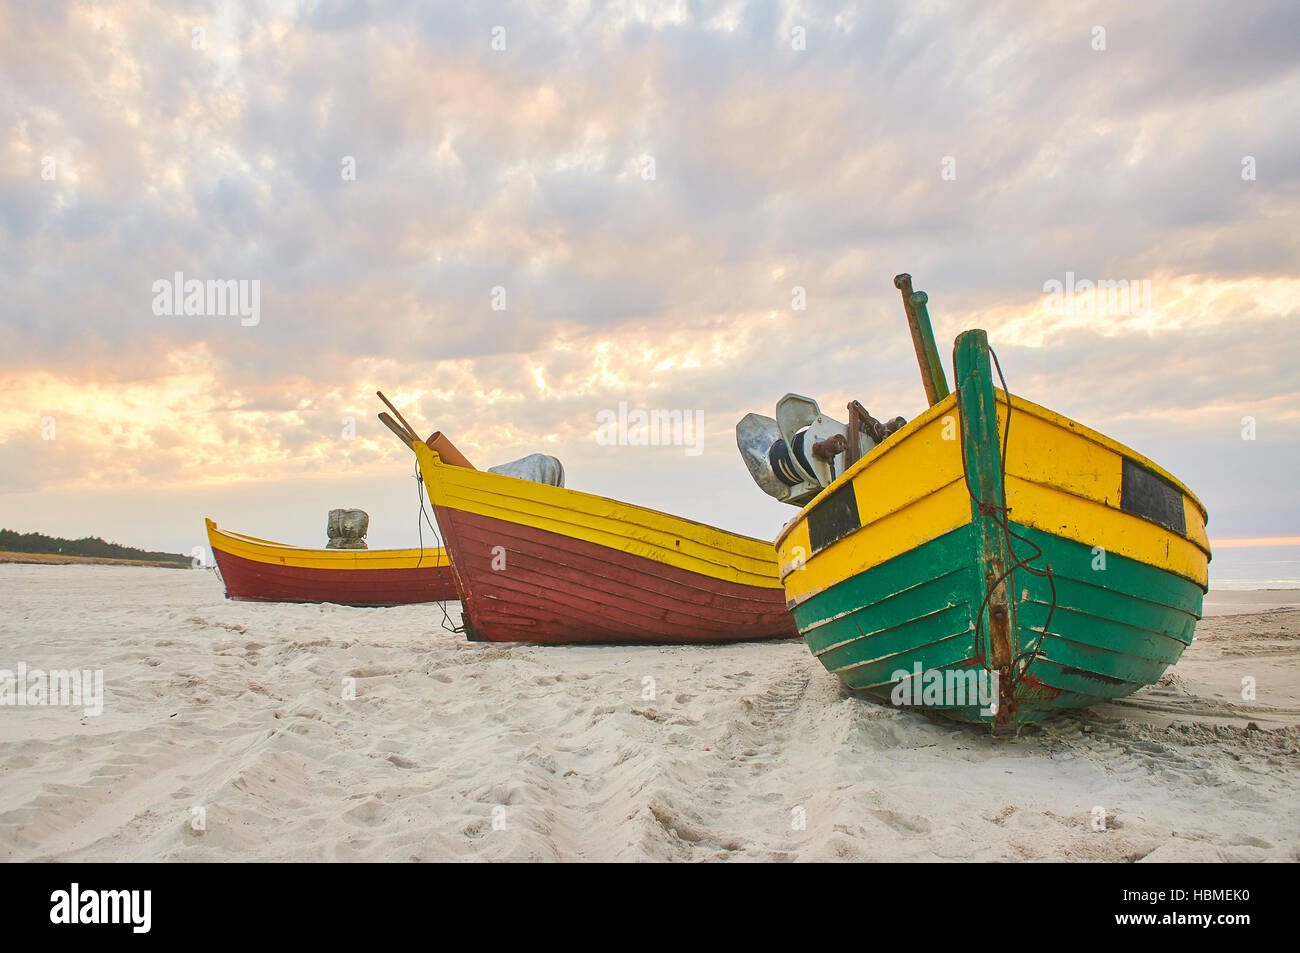 Fishing boat at baltic sea sandy beach with dramatic sky during summertime in Poland Stock Photo